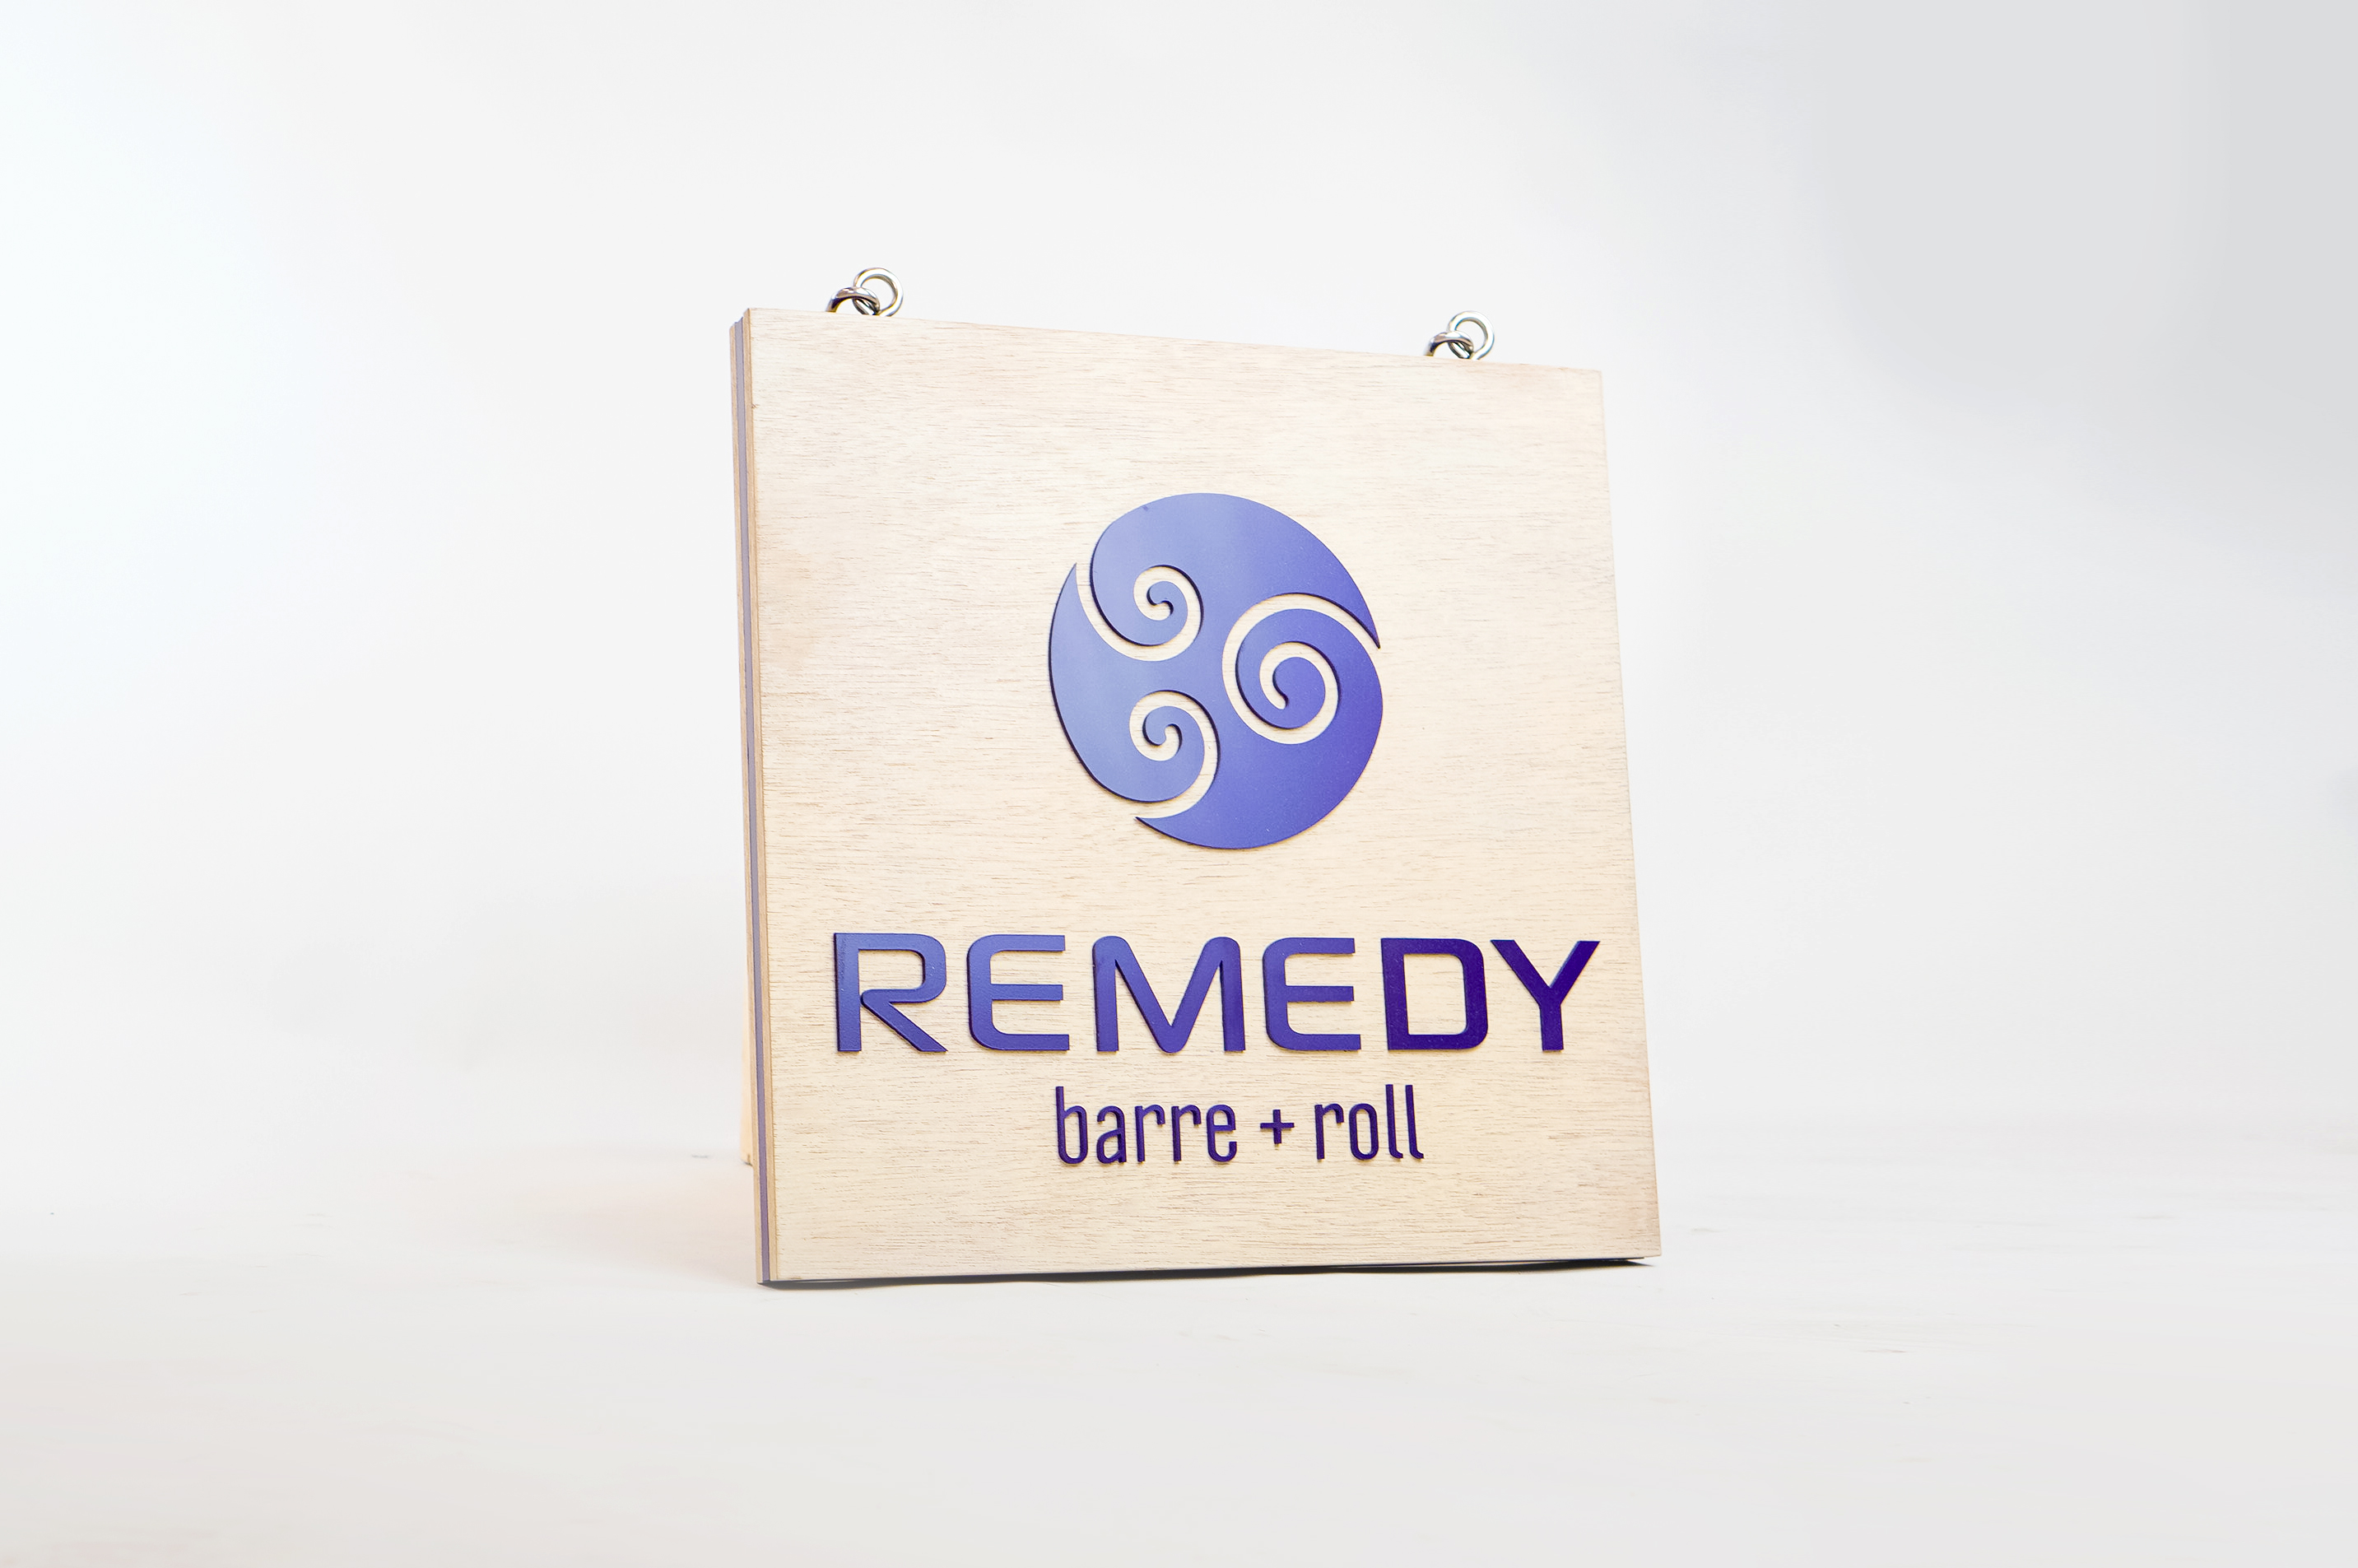 Hanging wood blade sign with purple logo for Remedy Barre and Foam Rolling, an independent studio offering barre & foam-roller stretching classes in Oakland CA.